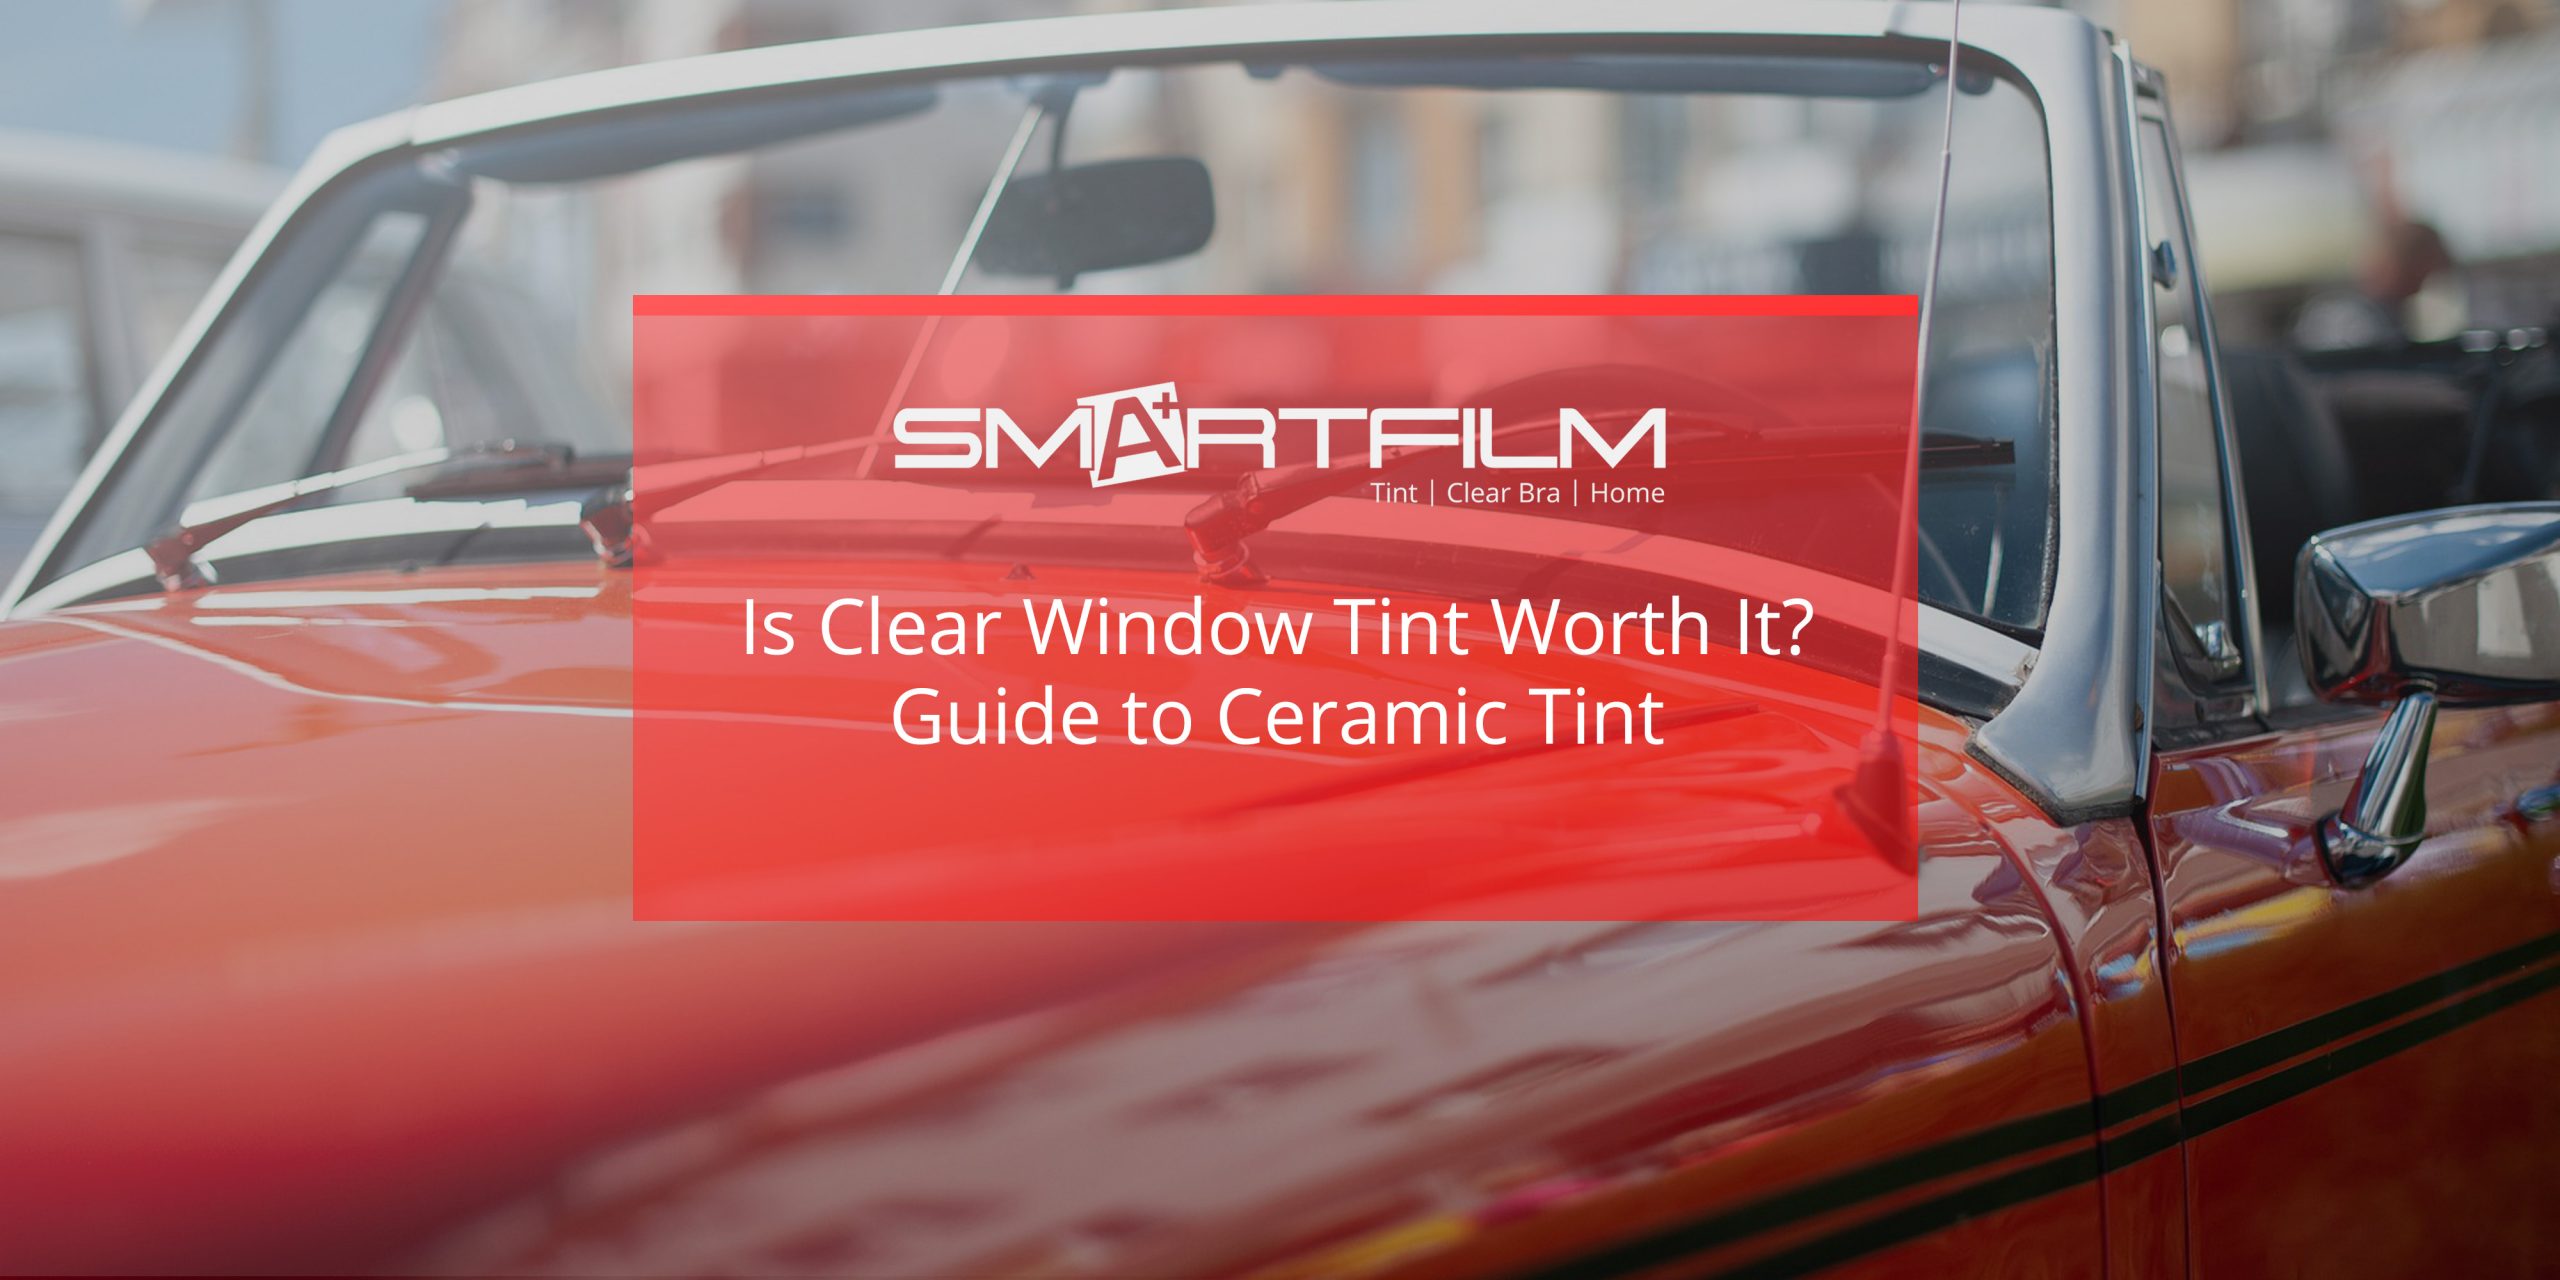 How To Repair The Scratches On The Car Windshield Film? - Industry